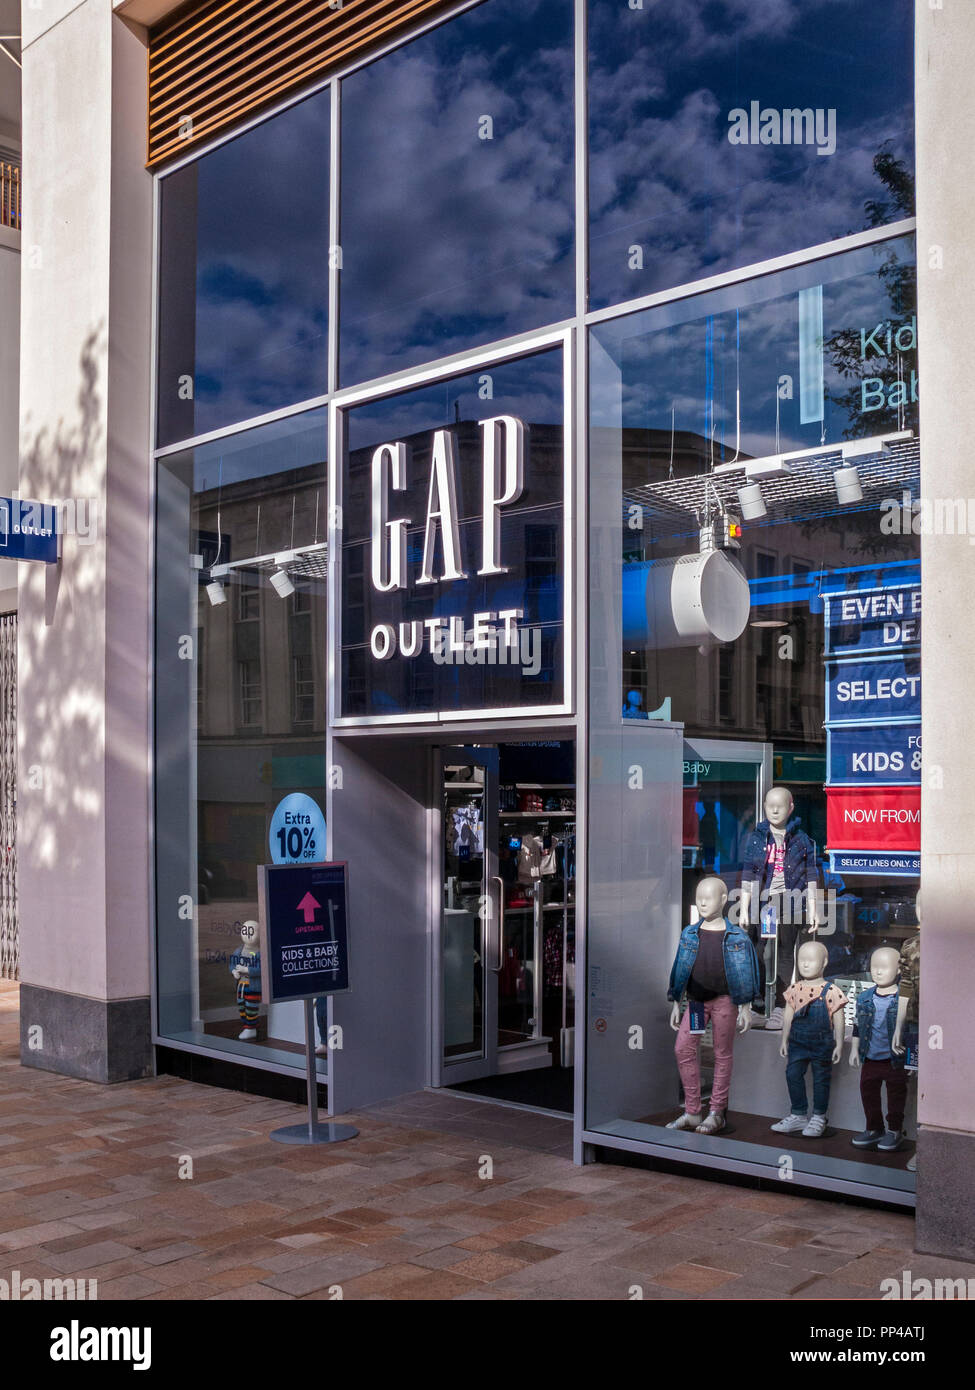 Gap Outlet, The Moor, Sheffield Stock Photo - Alamy